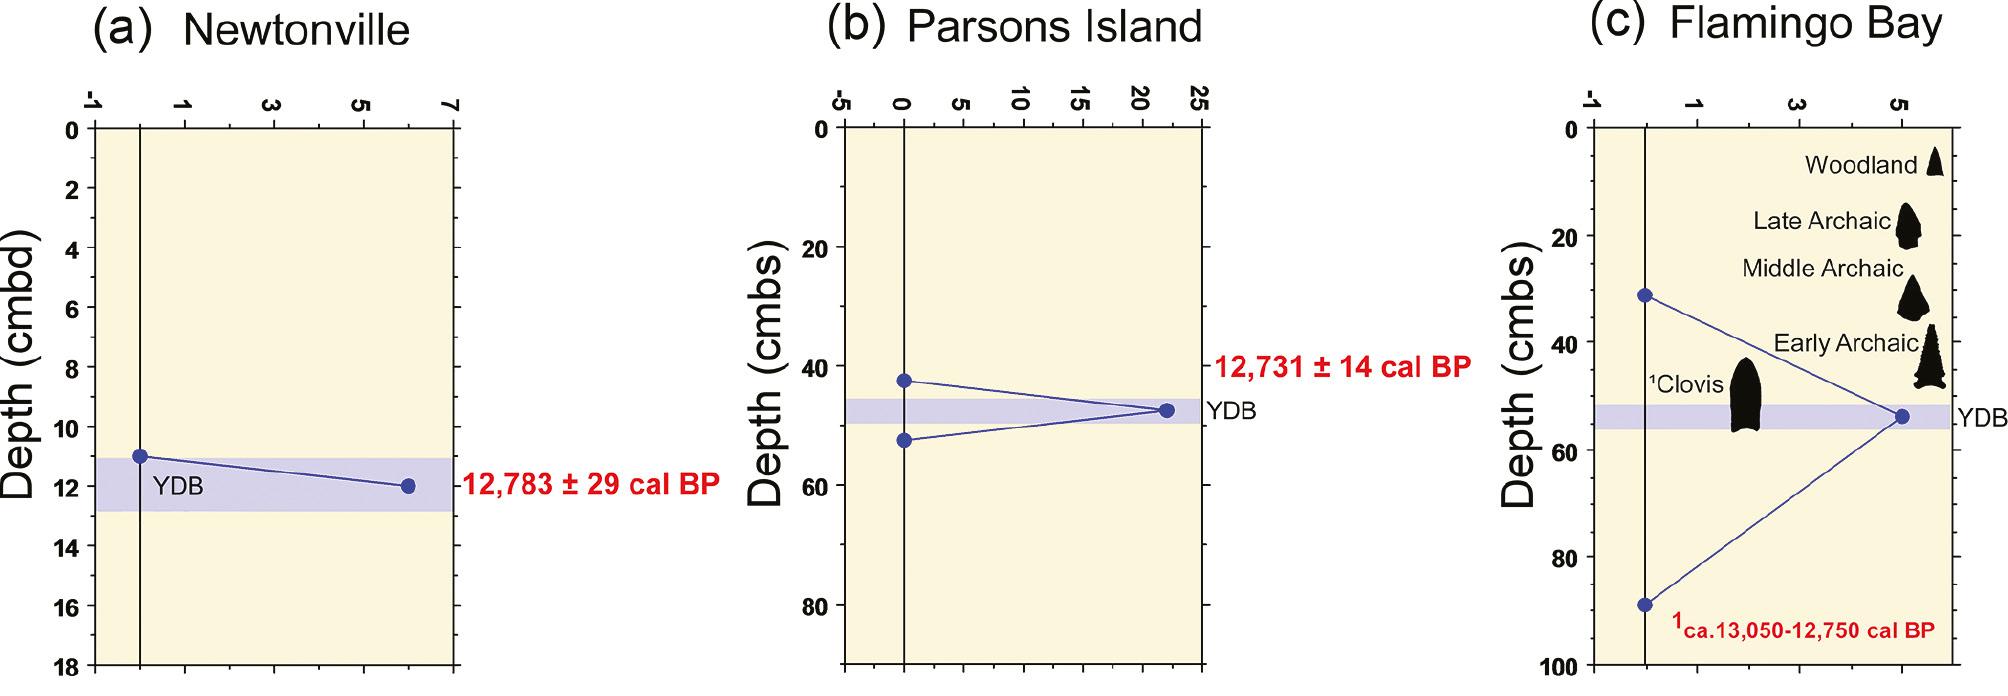 The number of shock-fractured quartz grains observed by depth at (a) Newtonville, microstrat, (b) Parsons Island, and (c) Flamingo Bay. Shock-fractured quartz grains were observed only in the YDB layer, co-occurring with the peaks in microspherules, Pt, and anomalously high values in various other elements. Also shown is generalized archaeostratigraphic data for Flamingo Bay (38AK469) (i.e., Paleoindian through Woodland hafted biface silhouettes), radiocarbon dates (cal BP), and YDB layer (blue bar) each sample for the Flamingo Bay sequence is plotted in the middle of the sample interval. The accepted date range for the Clovis culture is ∼13,050–12,750 cal BP [93], and the YDB proxy layer overlaps with the base of the Younger Dryas episode estimated at ∼50–55 cmbs. In Kennett et al. [1], a Bayesian analysis of dates from YDB sites across North America shows synchronous deposition of the YDB proxy layer at ∼12,785 ± 50 years (range 12,735 to 12,835) cal BP [3]. Note that Pt abundance on the graph is an average of two measurements from the same sample.